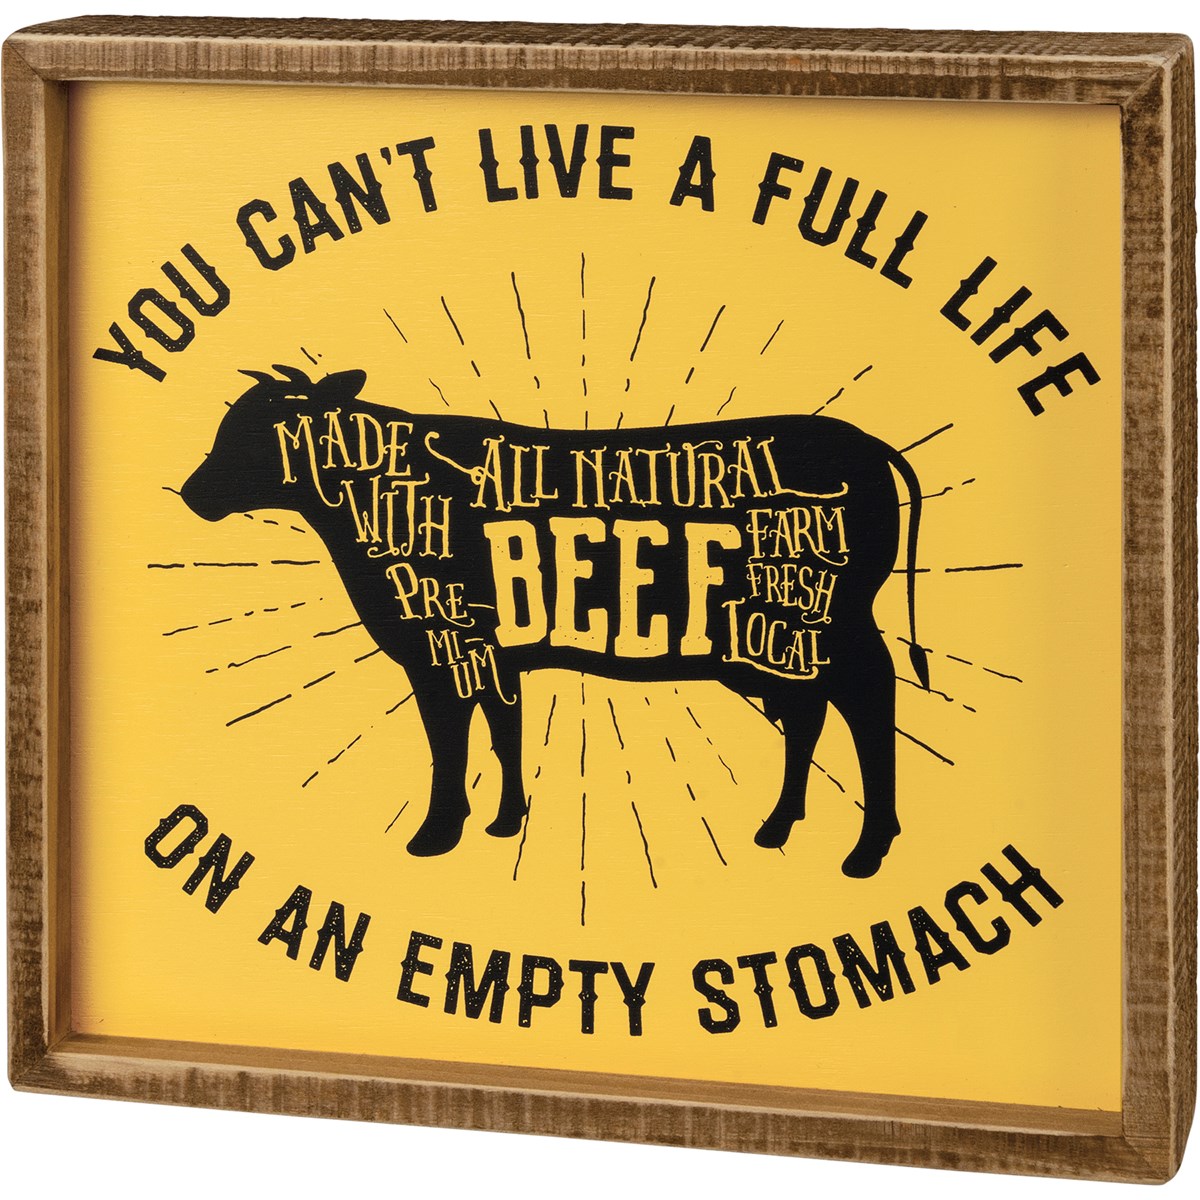 Inset Box Sign - You Can't Live A Full Life - 9" x 8.50" x 1.75" - Wood